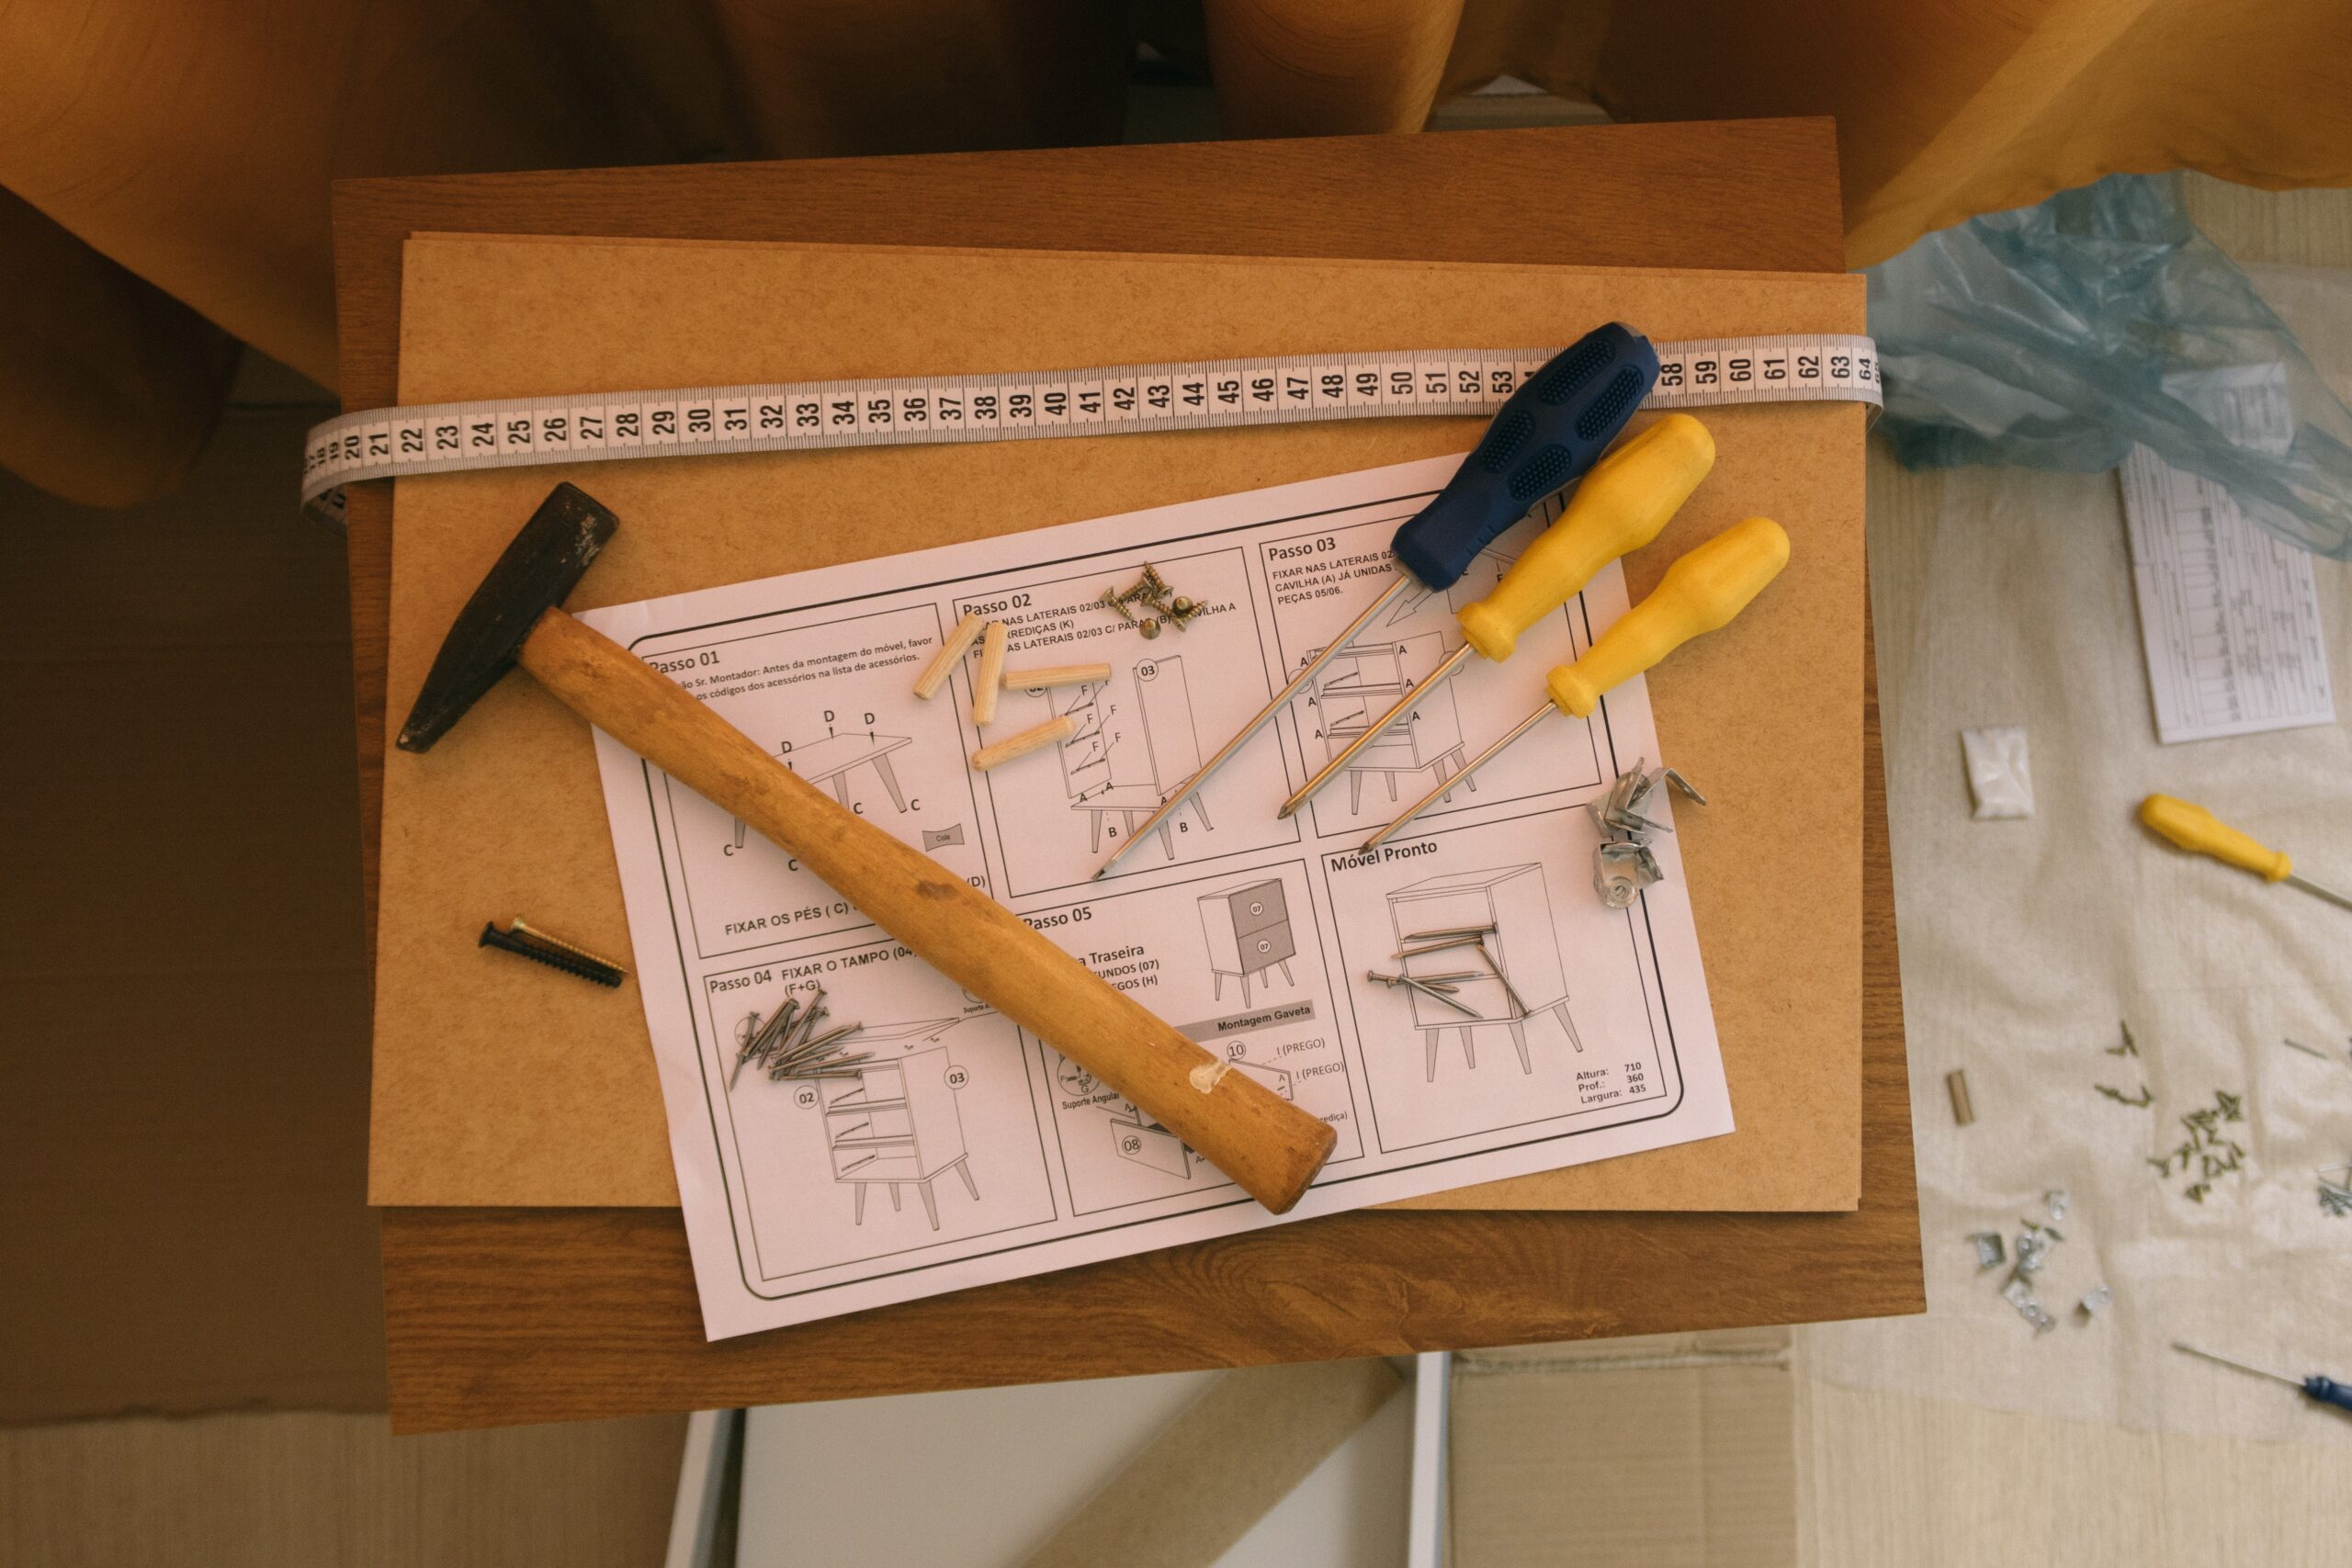 Furniture assembly can be daunting to do it yourself. Let Paul Franc Handyman do it for you.